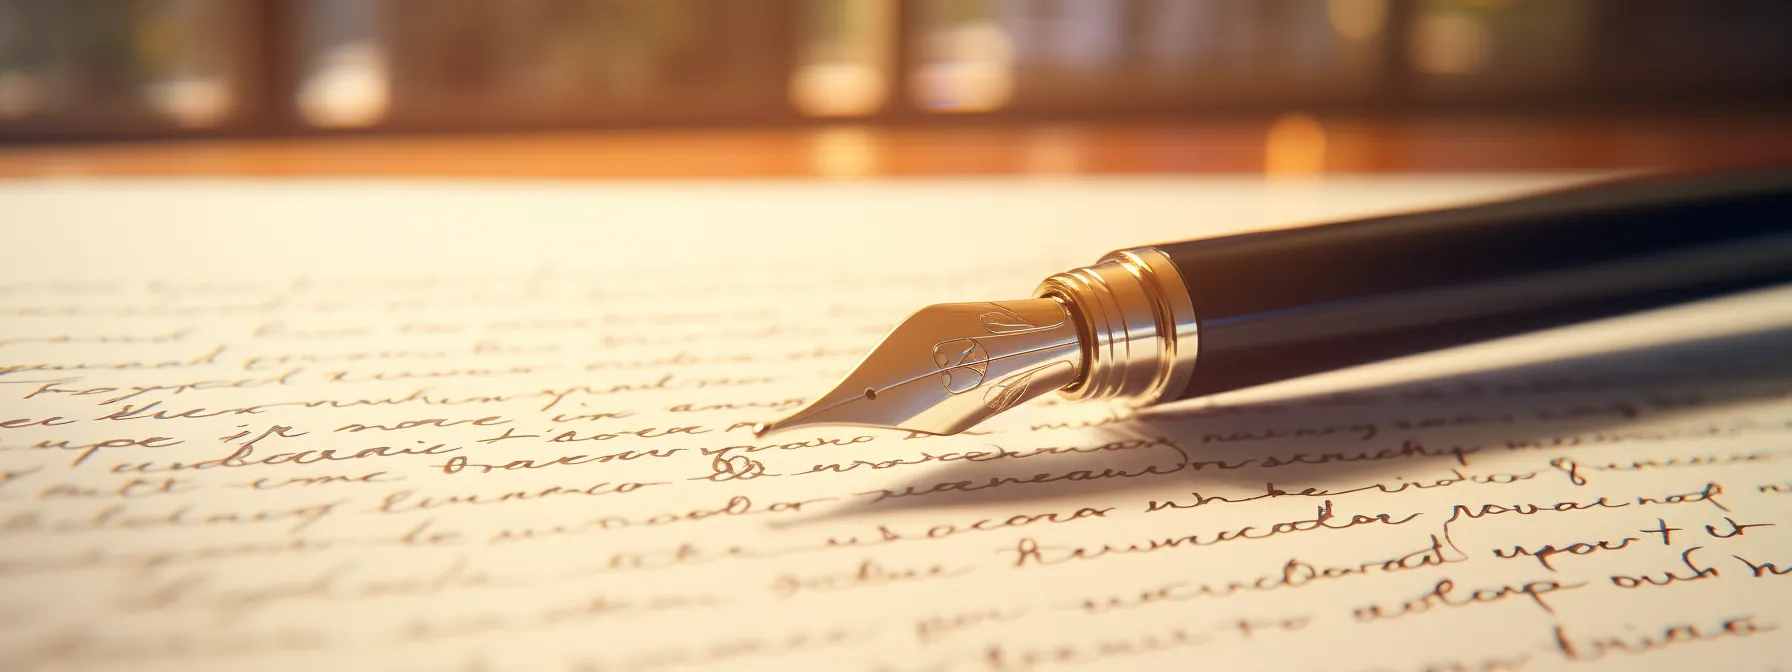 an image showing a pen poised above a paper with various transition words written in a fluid and seamless manner.